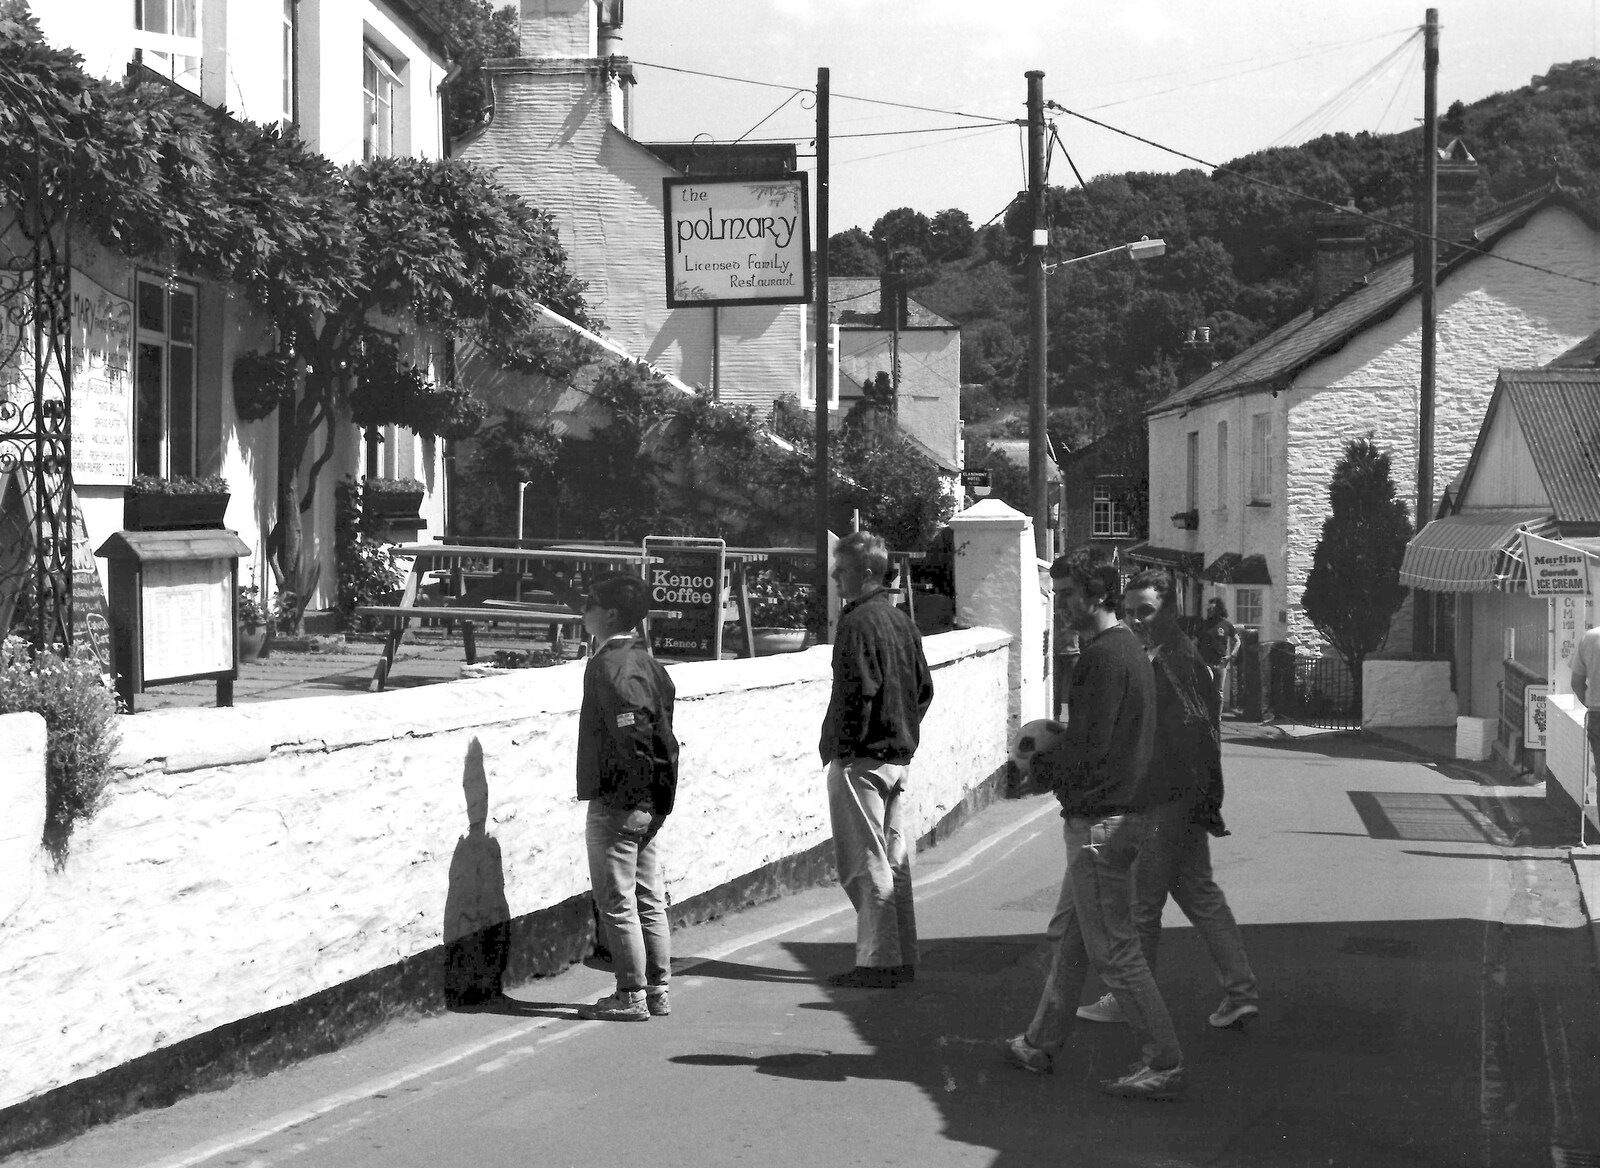 The Polmary restaurant in Polperro from Uni: The Last Day of Term, Plymouth Polytechnic, Devon - 2nd June 1987